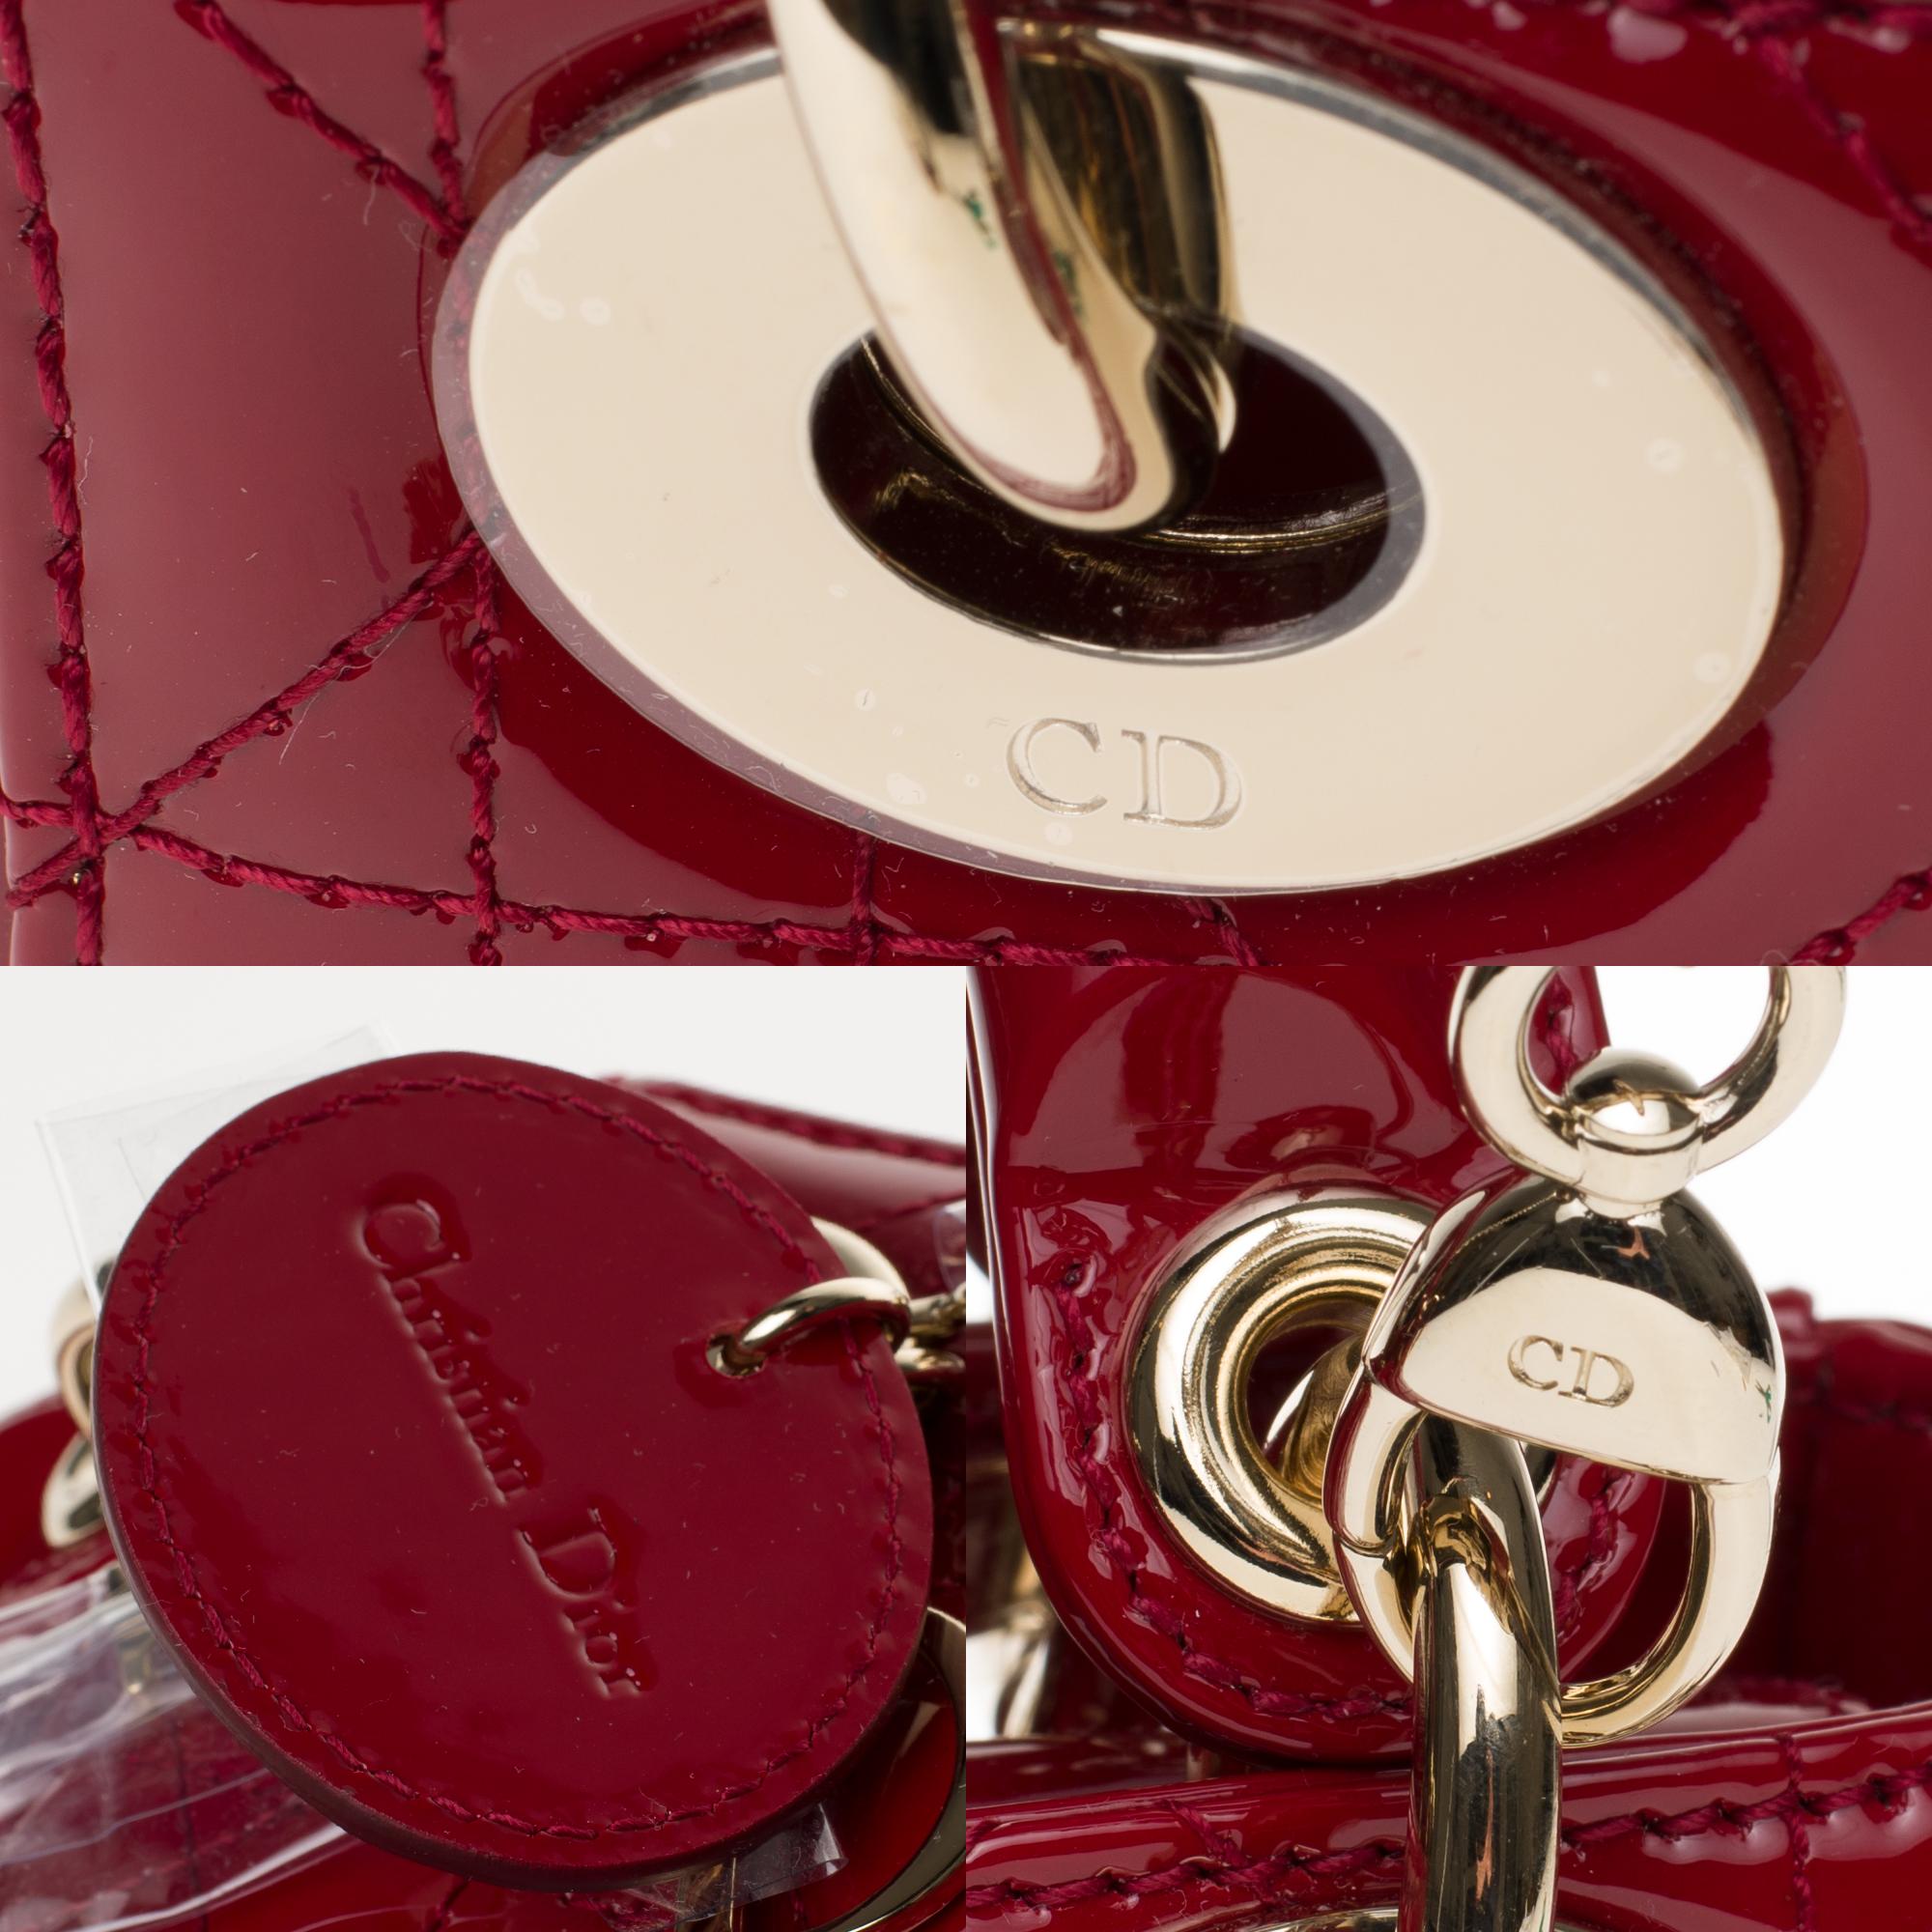 Brand new - Mini Lady Dior handbag with strap in cherry red patent leather 5